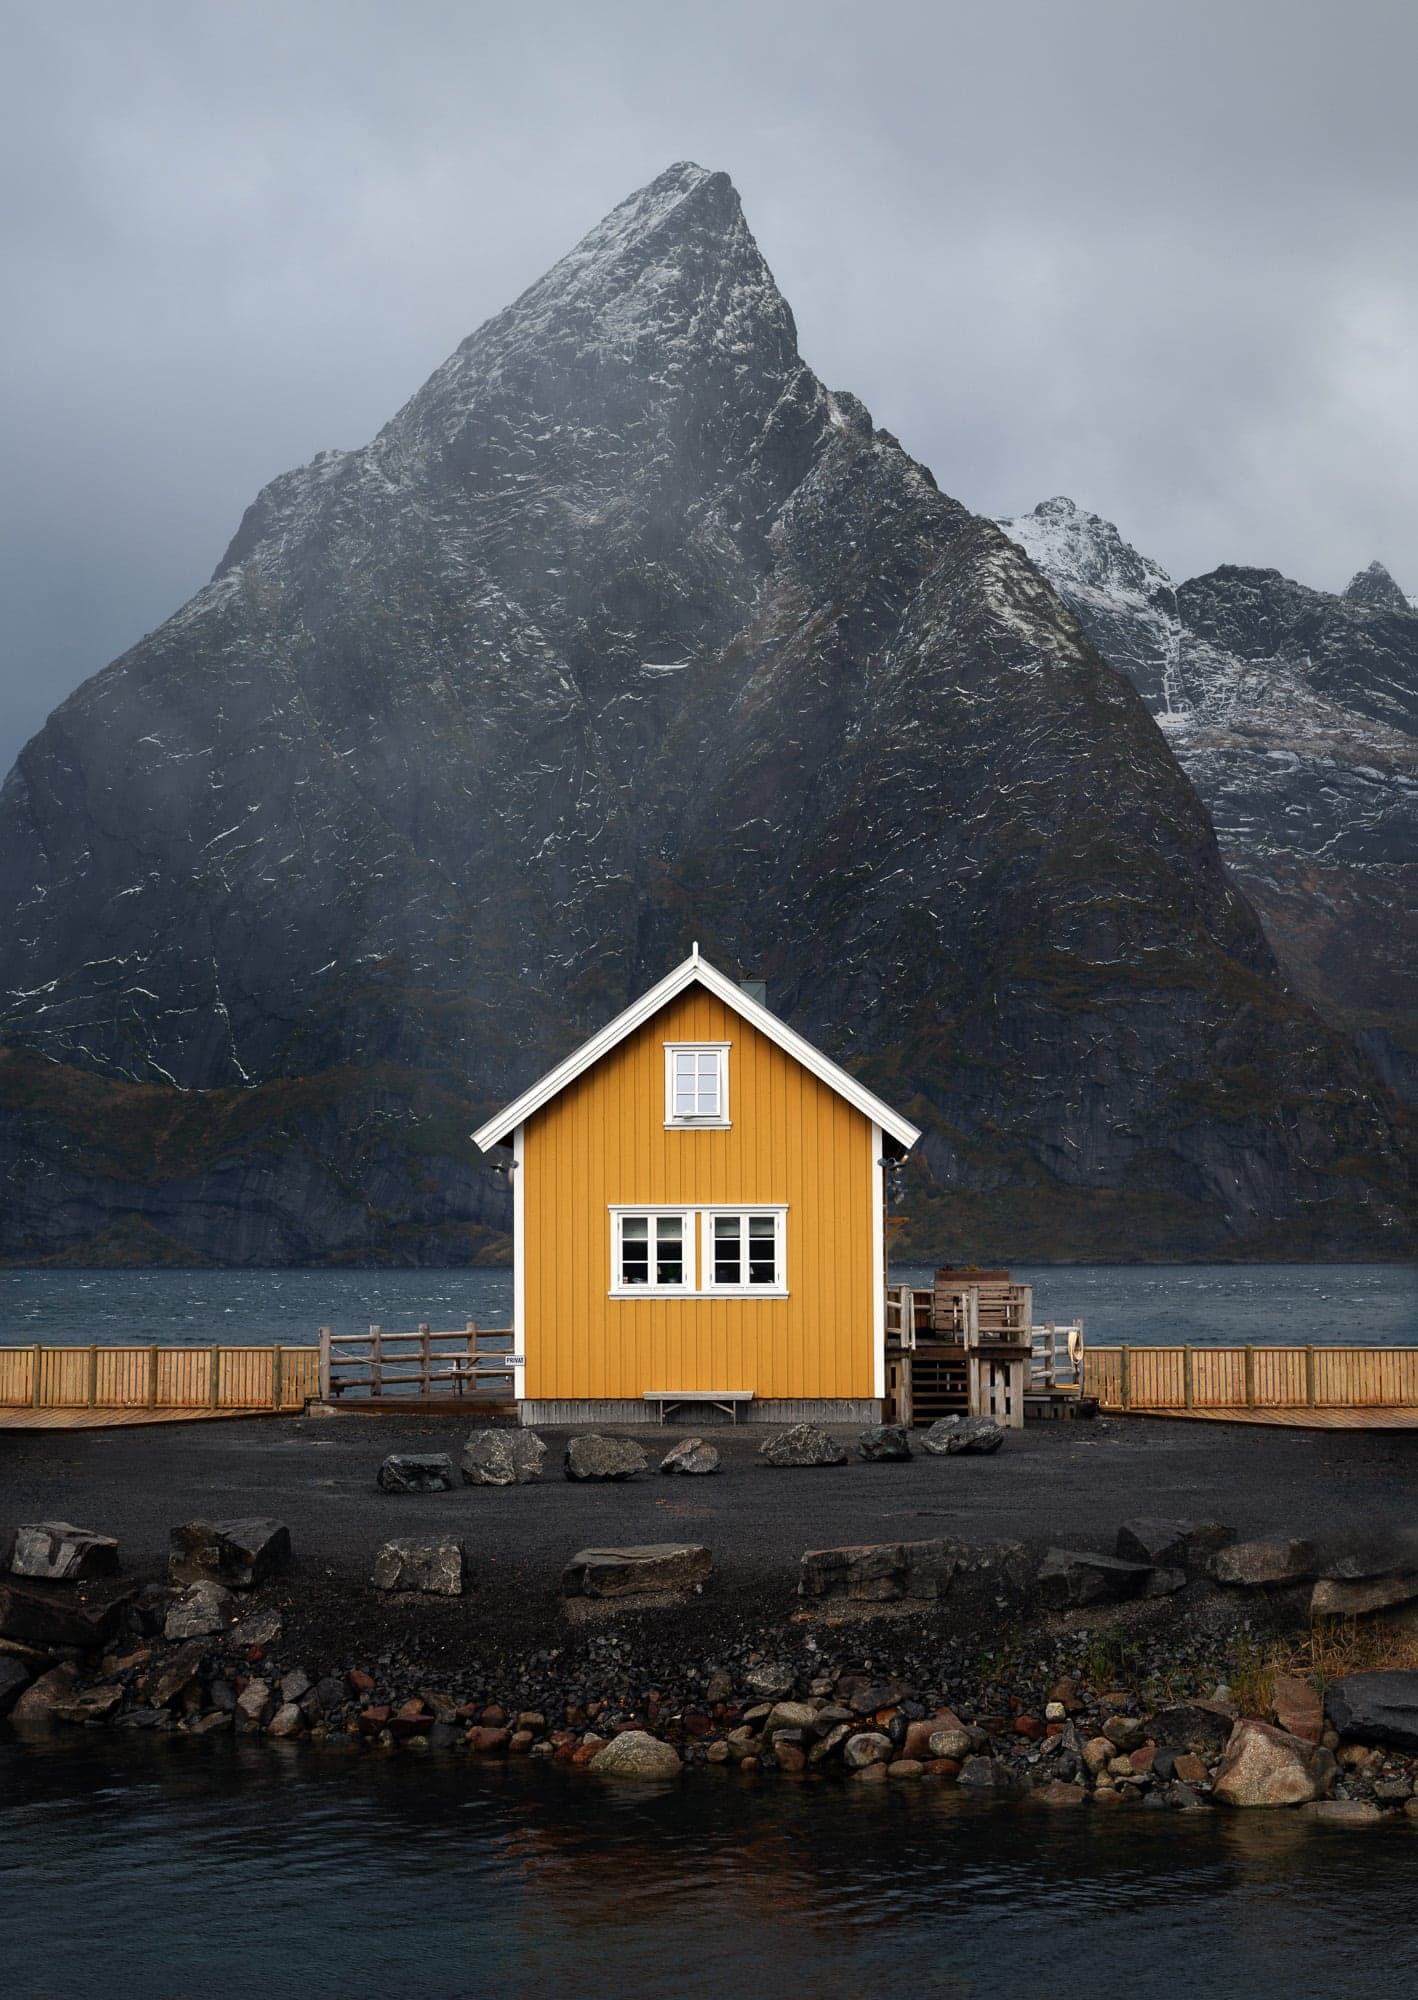 A solitary yellow cabin stands in the foreground with a towering, snow-streaked mountain rising dramatically behind it in Lofoten, Norway.